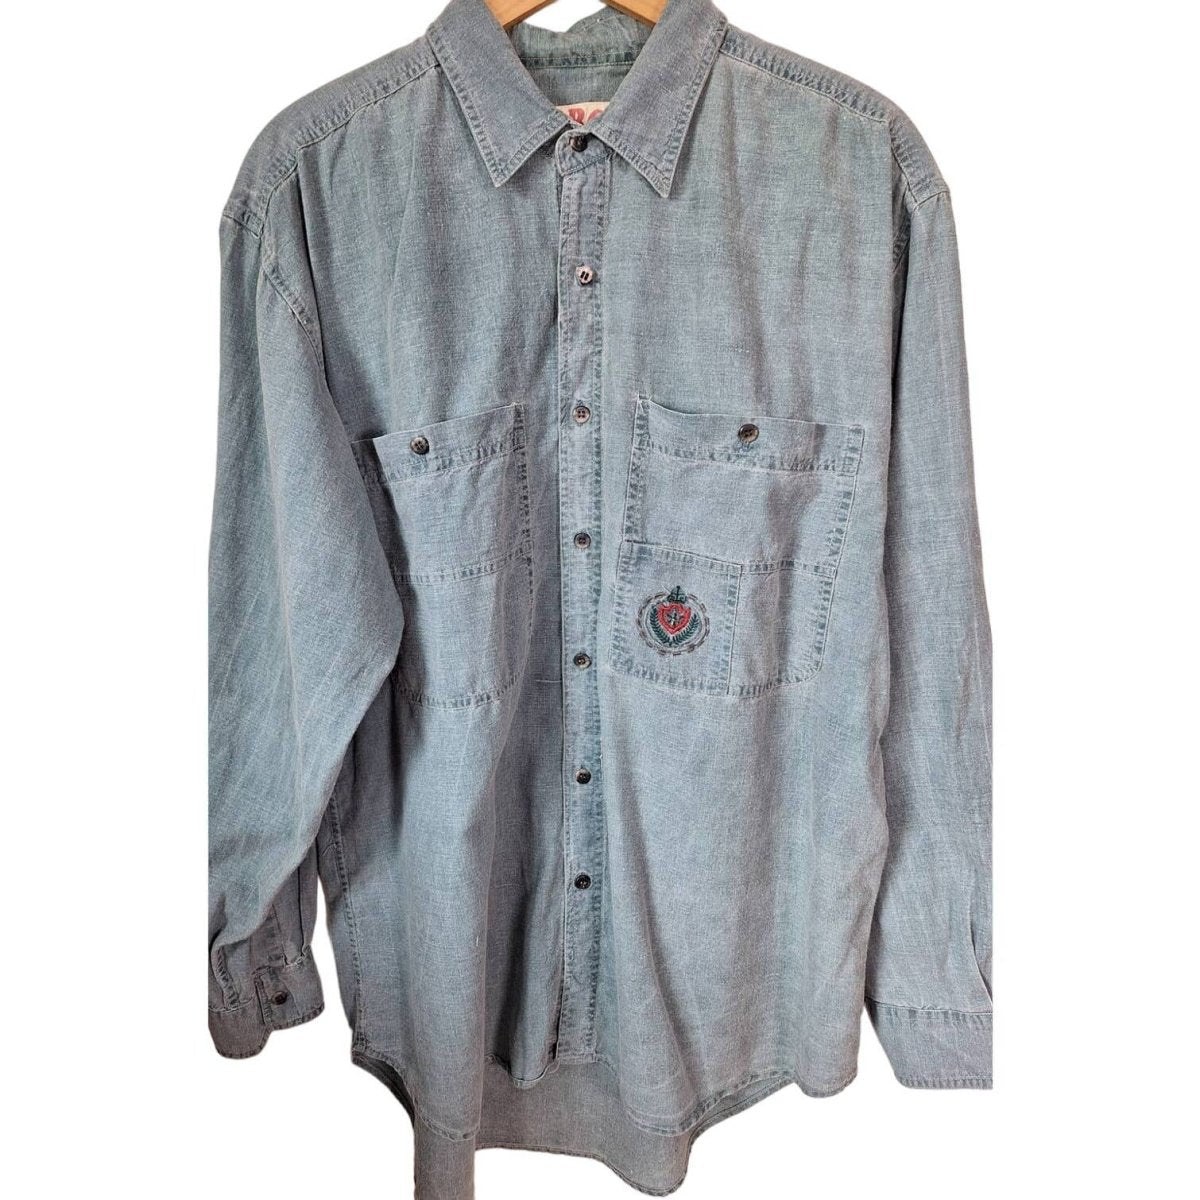 80s/90s Stonewashed Teal Cargo Shirt Men Size Large - themallvintage The Mall Vintage